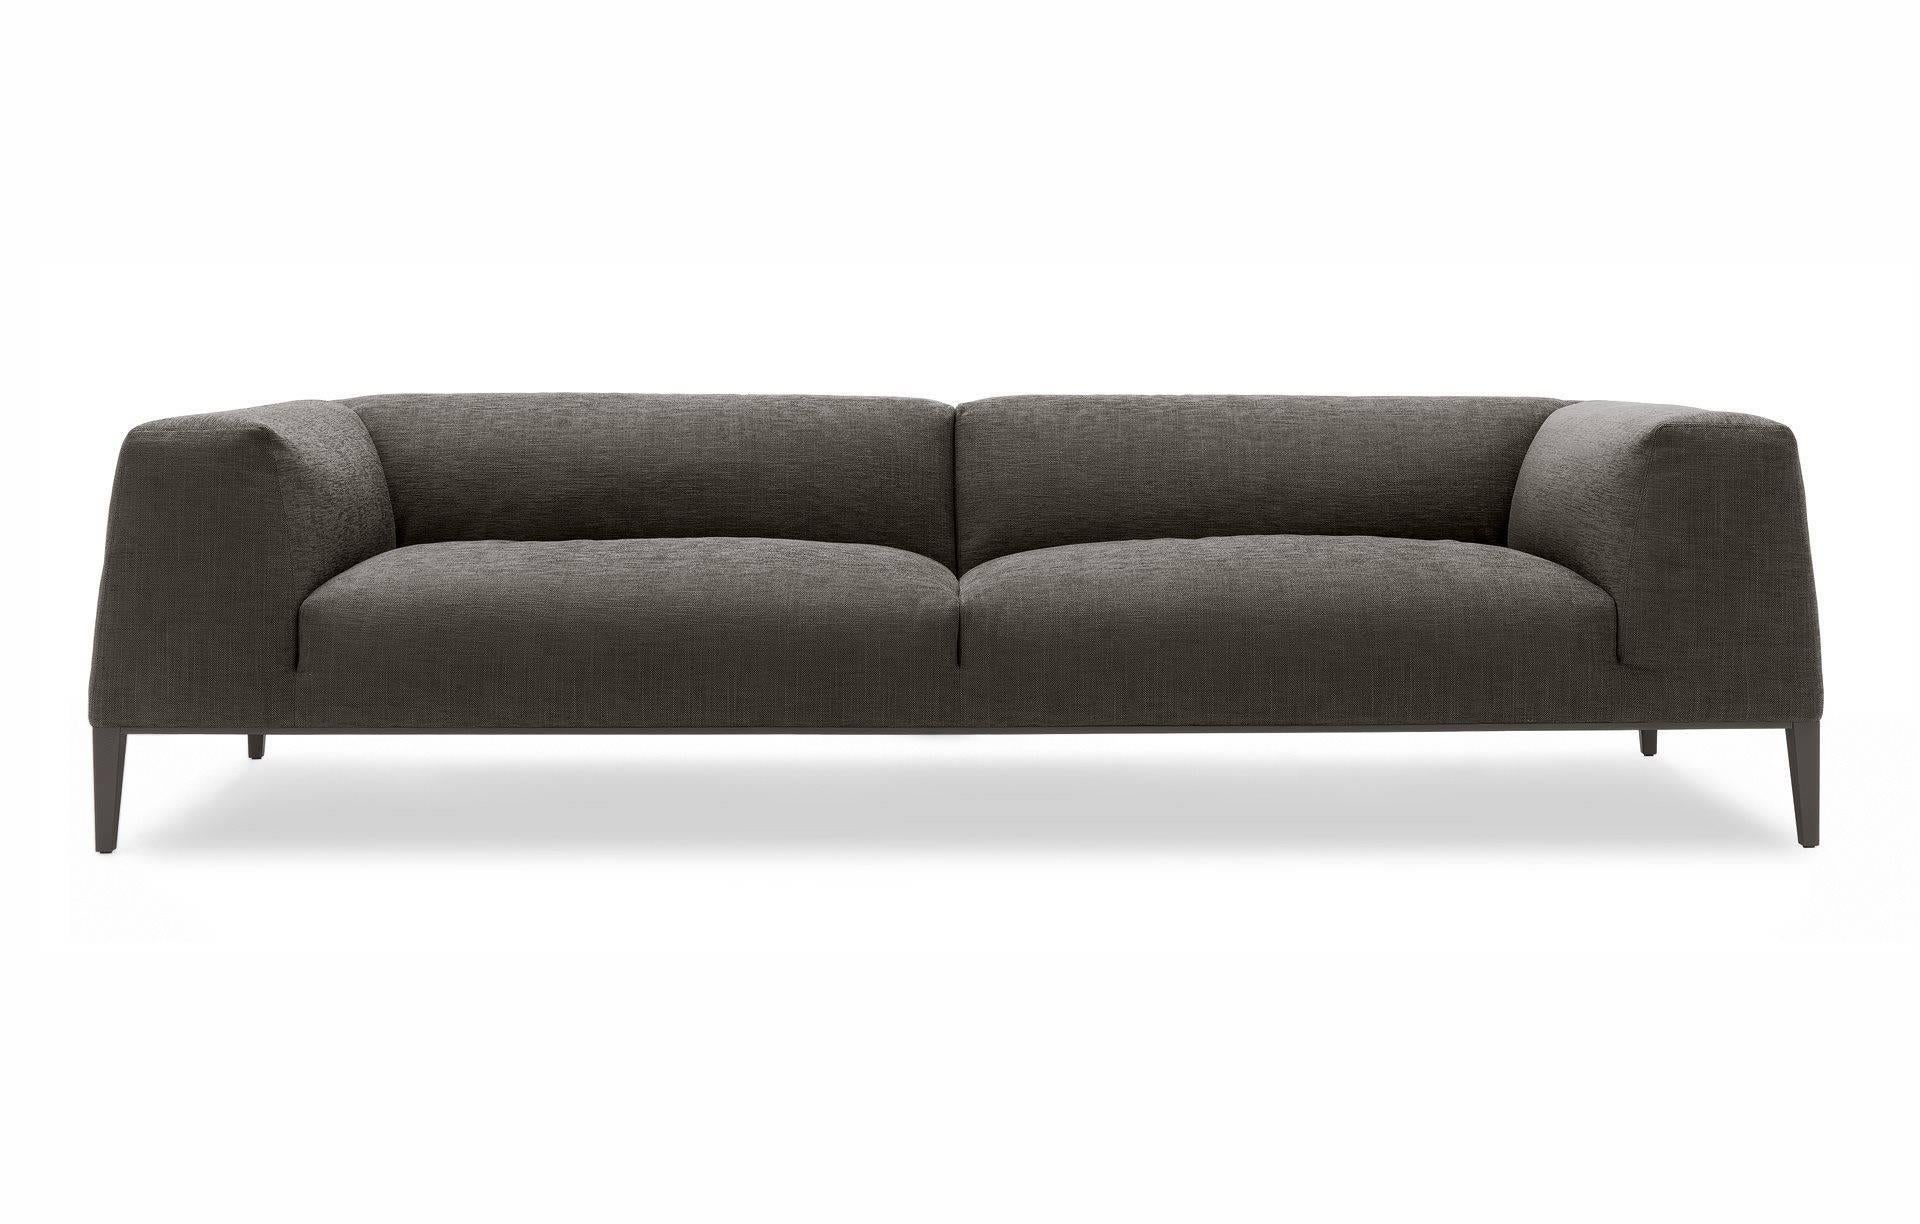 Metropolitan, designed by Jean-Marie Massaud, is a sofa oozing impeccable elegance. This solution stands out for its optional side pockets and the minimum-thickness aluminium frame. The Metropolitan straight sofa comes in three length options of